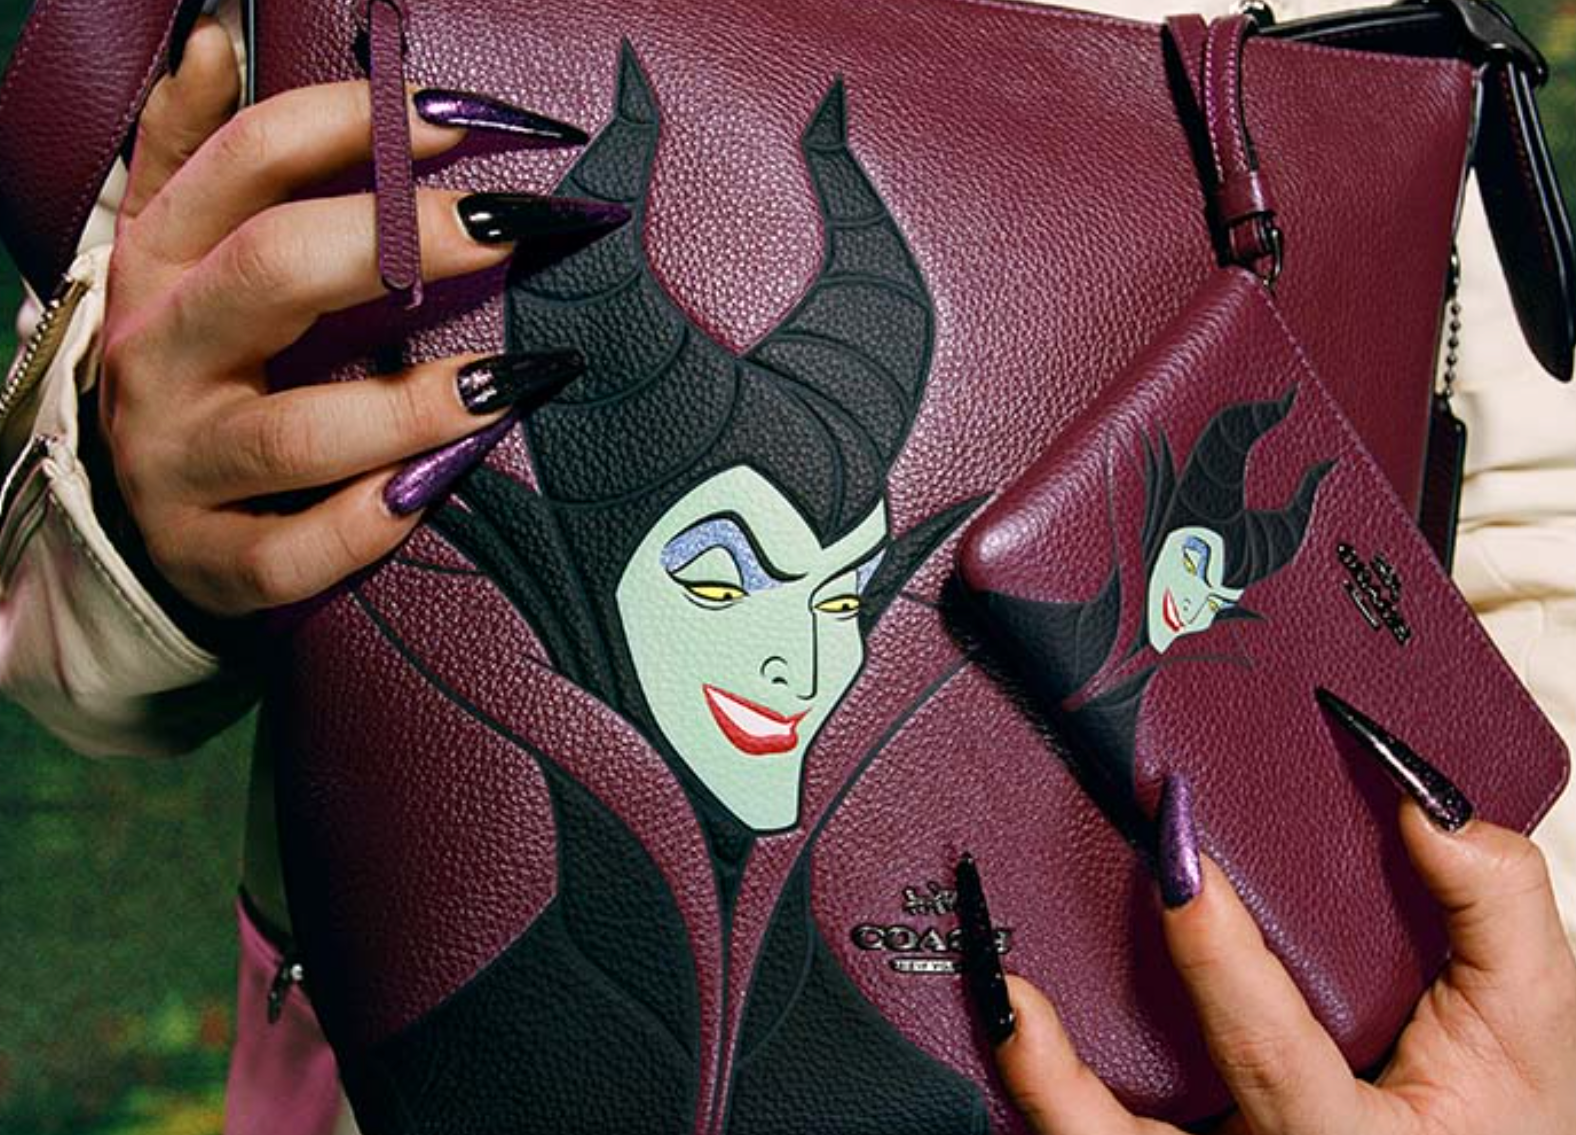 The Disney Villains Coach Collection Early Access Is Here with